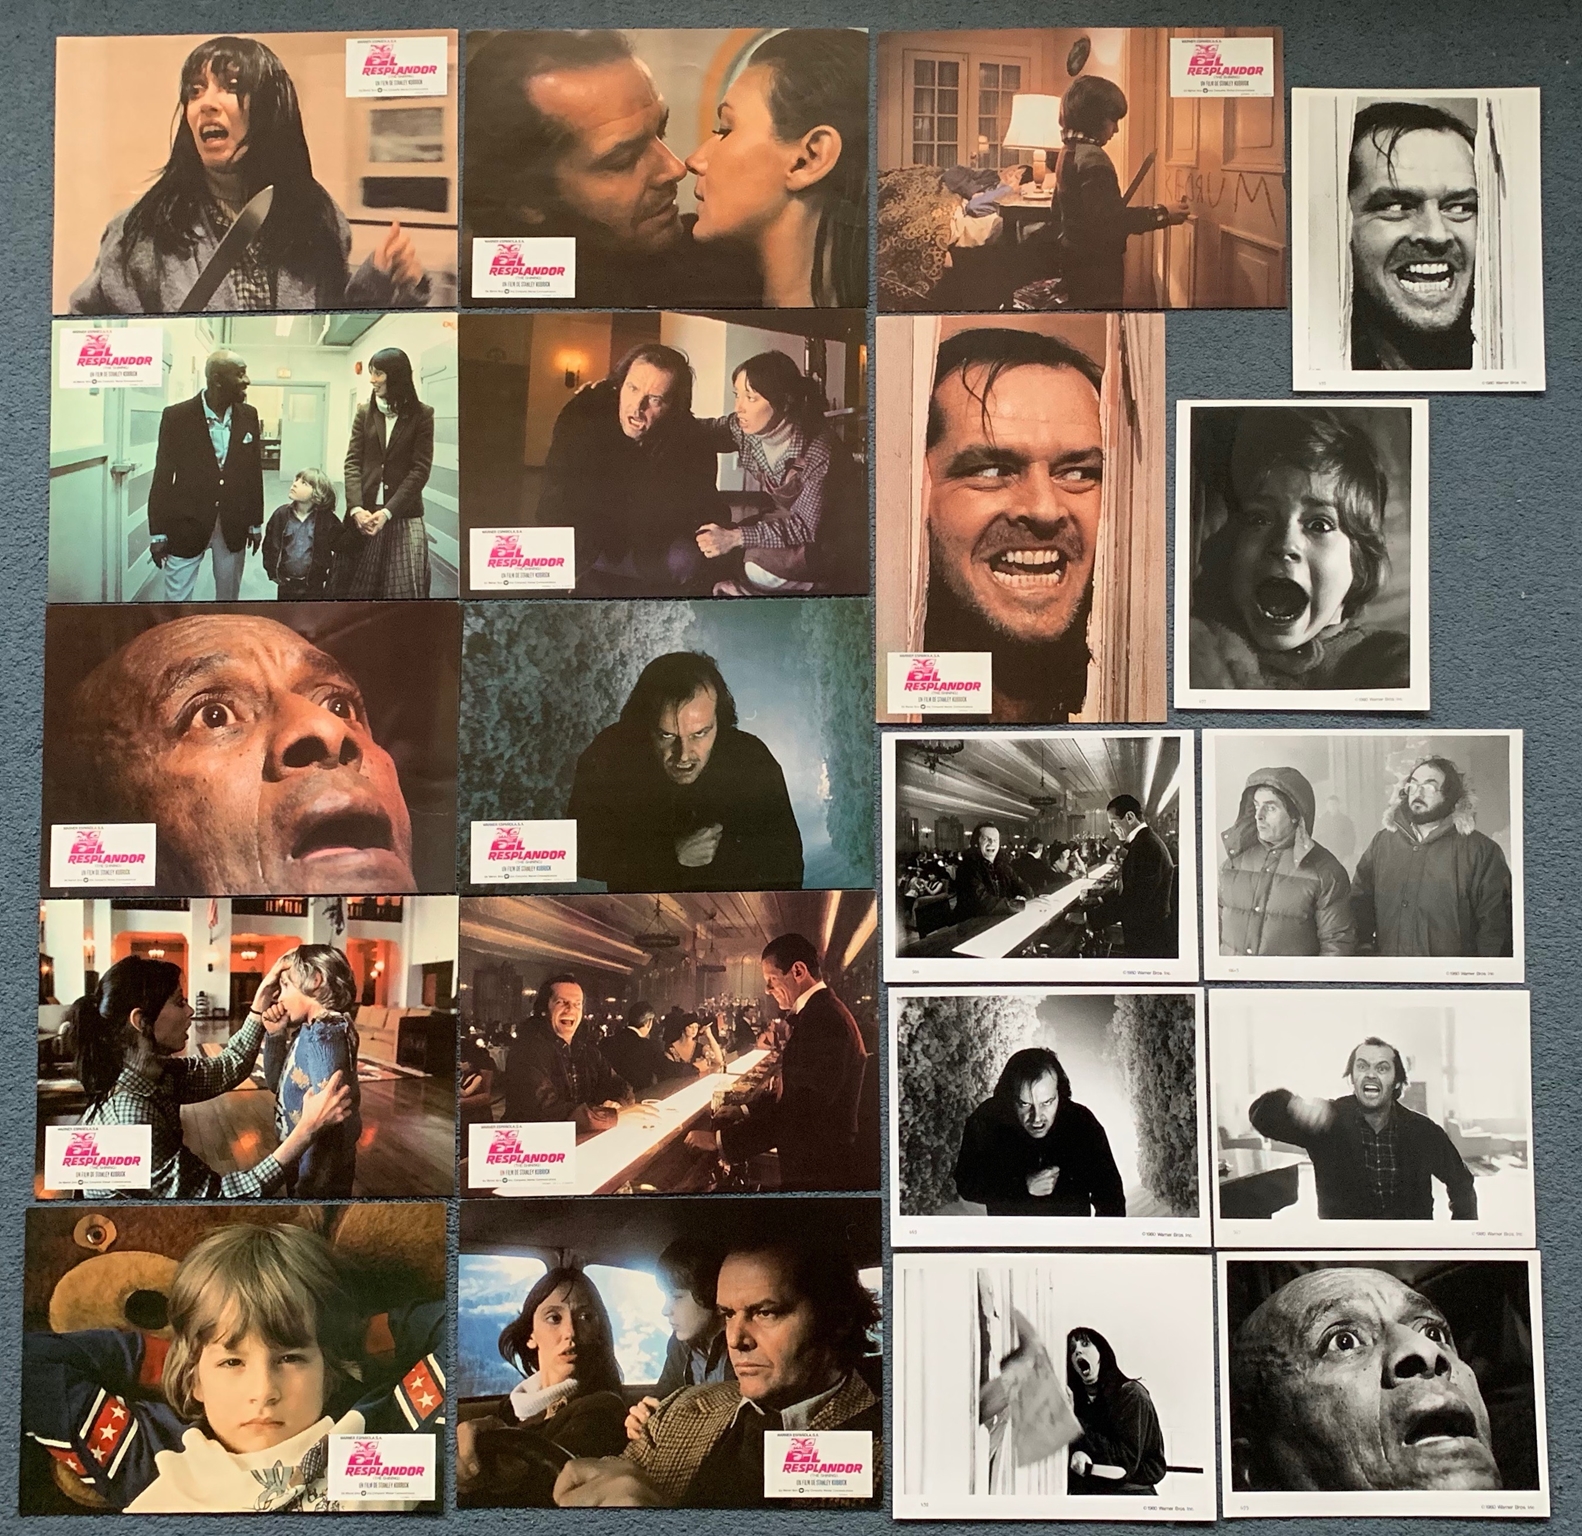 THE SHINING (1980) - (20 in Lot) - 8 x Studio issued black & white press stills featuring JACK